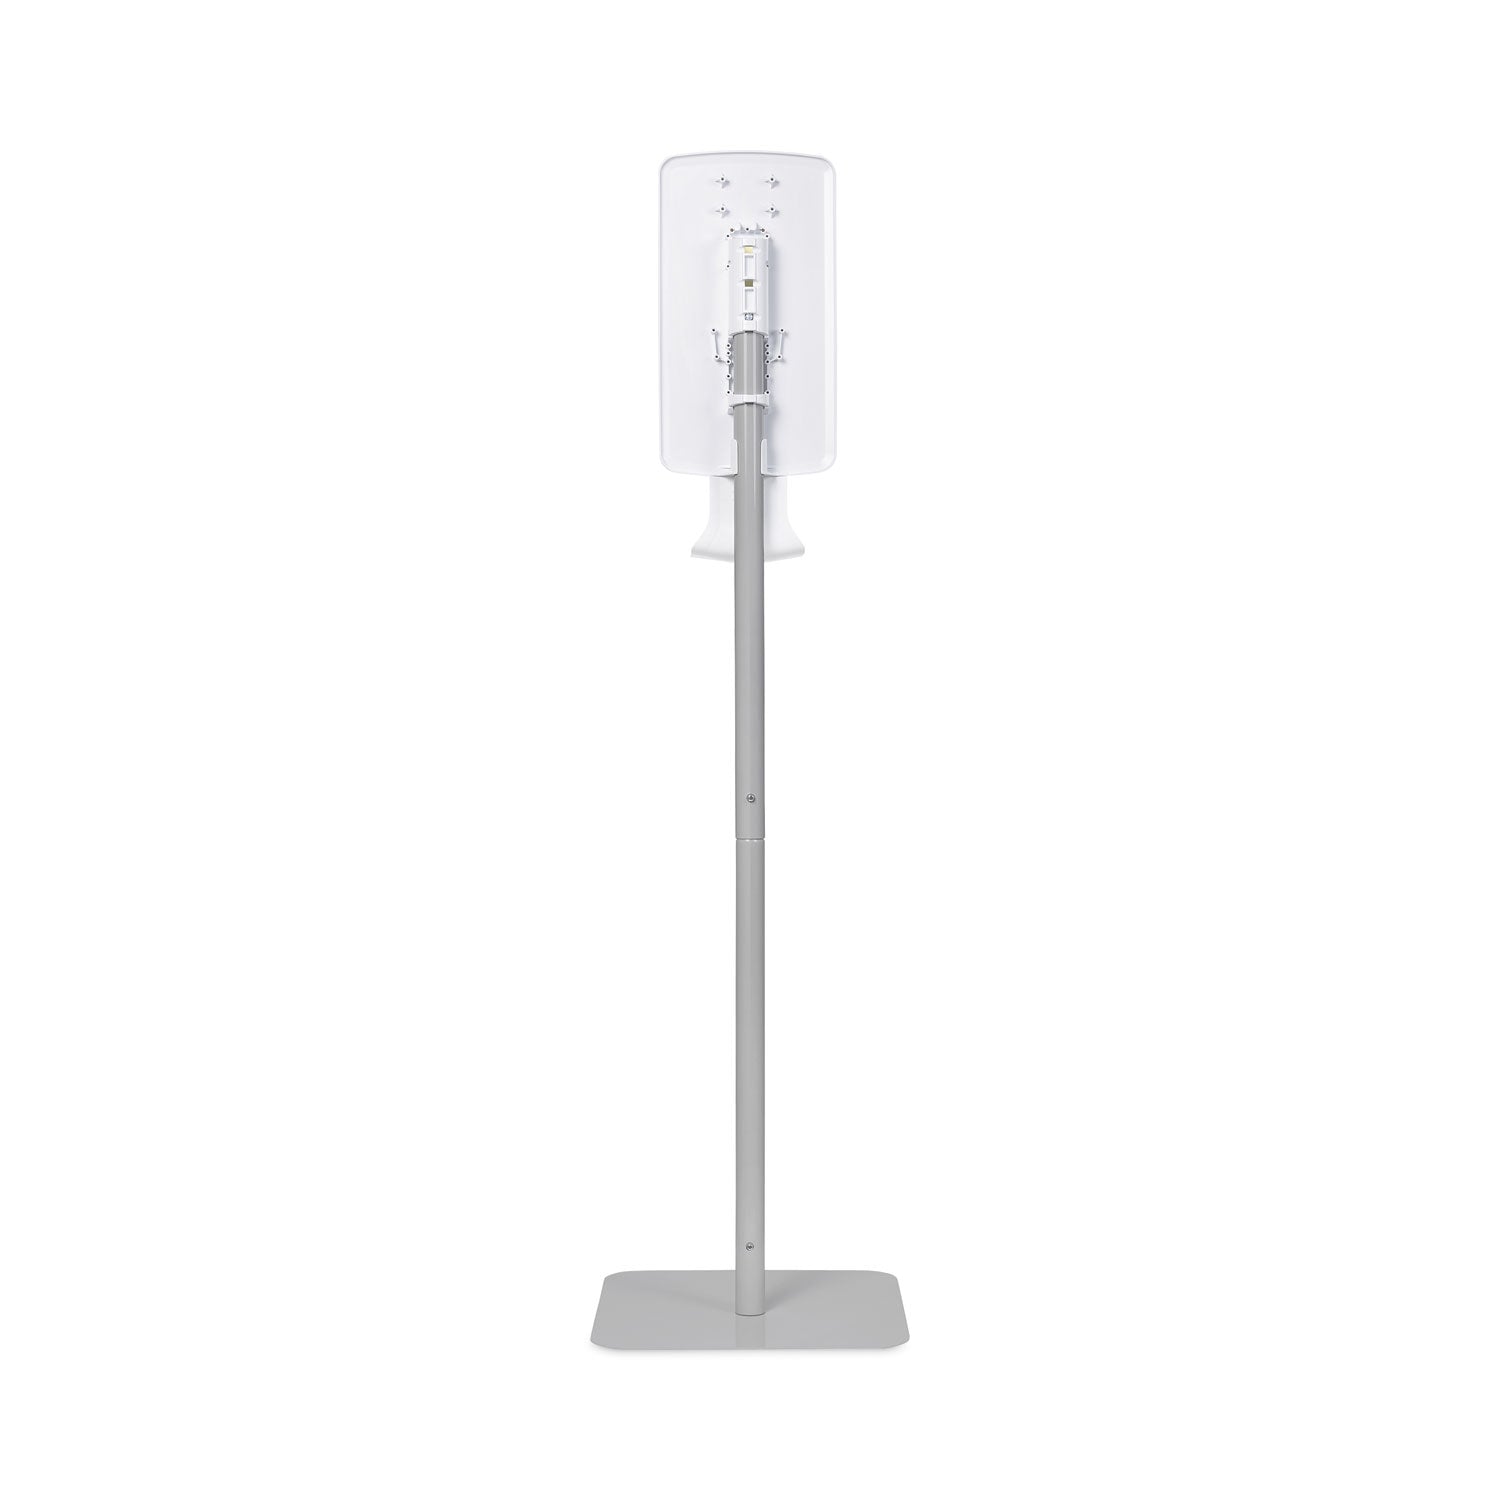 fit-touch-free-dispenser-floor-stand-157-x-157-x-583-white_dia09495ea - 2